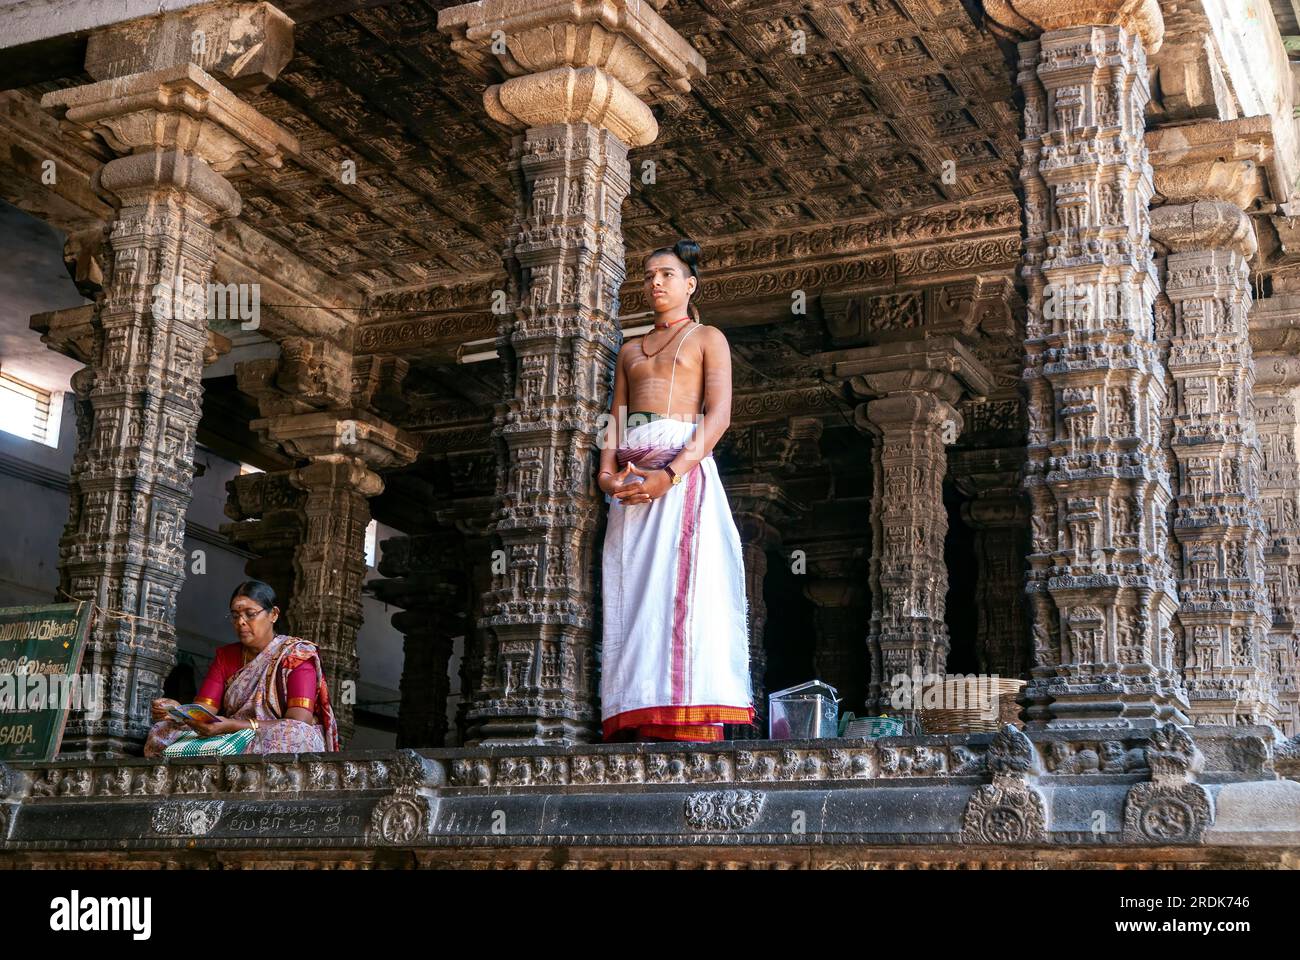 Temple priest at the Nritta Sabha or Hall of Dance with some fine pillars in Thillai Nataraja temple, Chidambaram, Tamil Nadu, South India, India Stock Photo